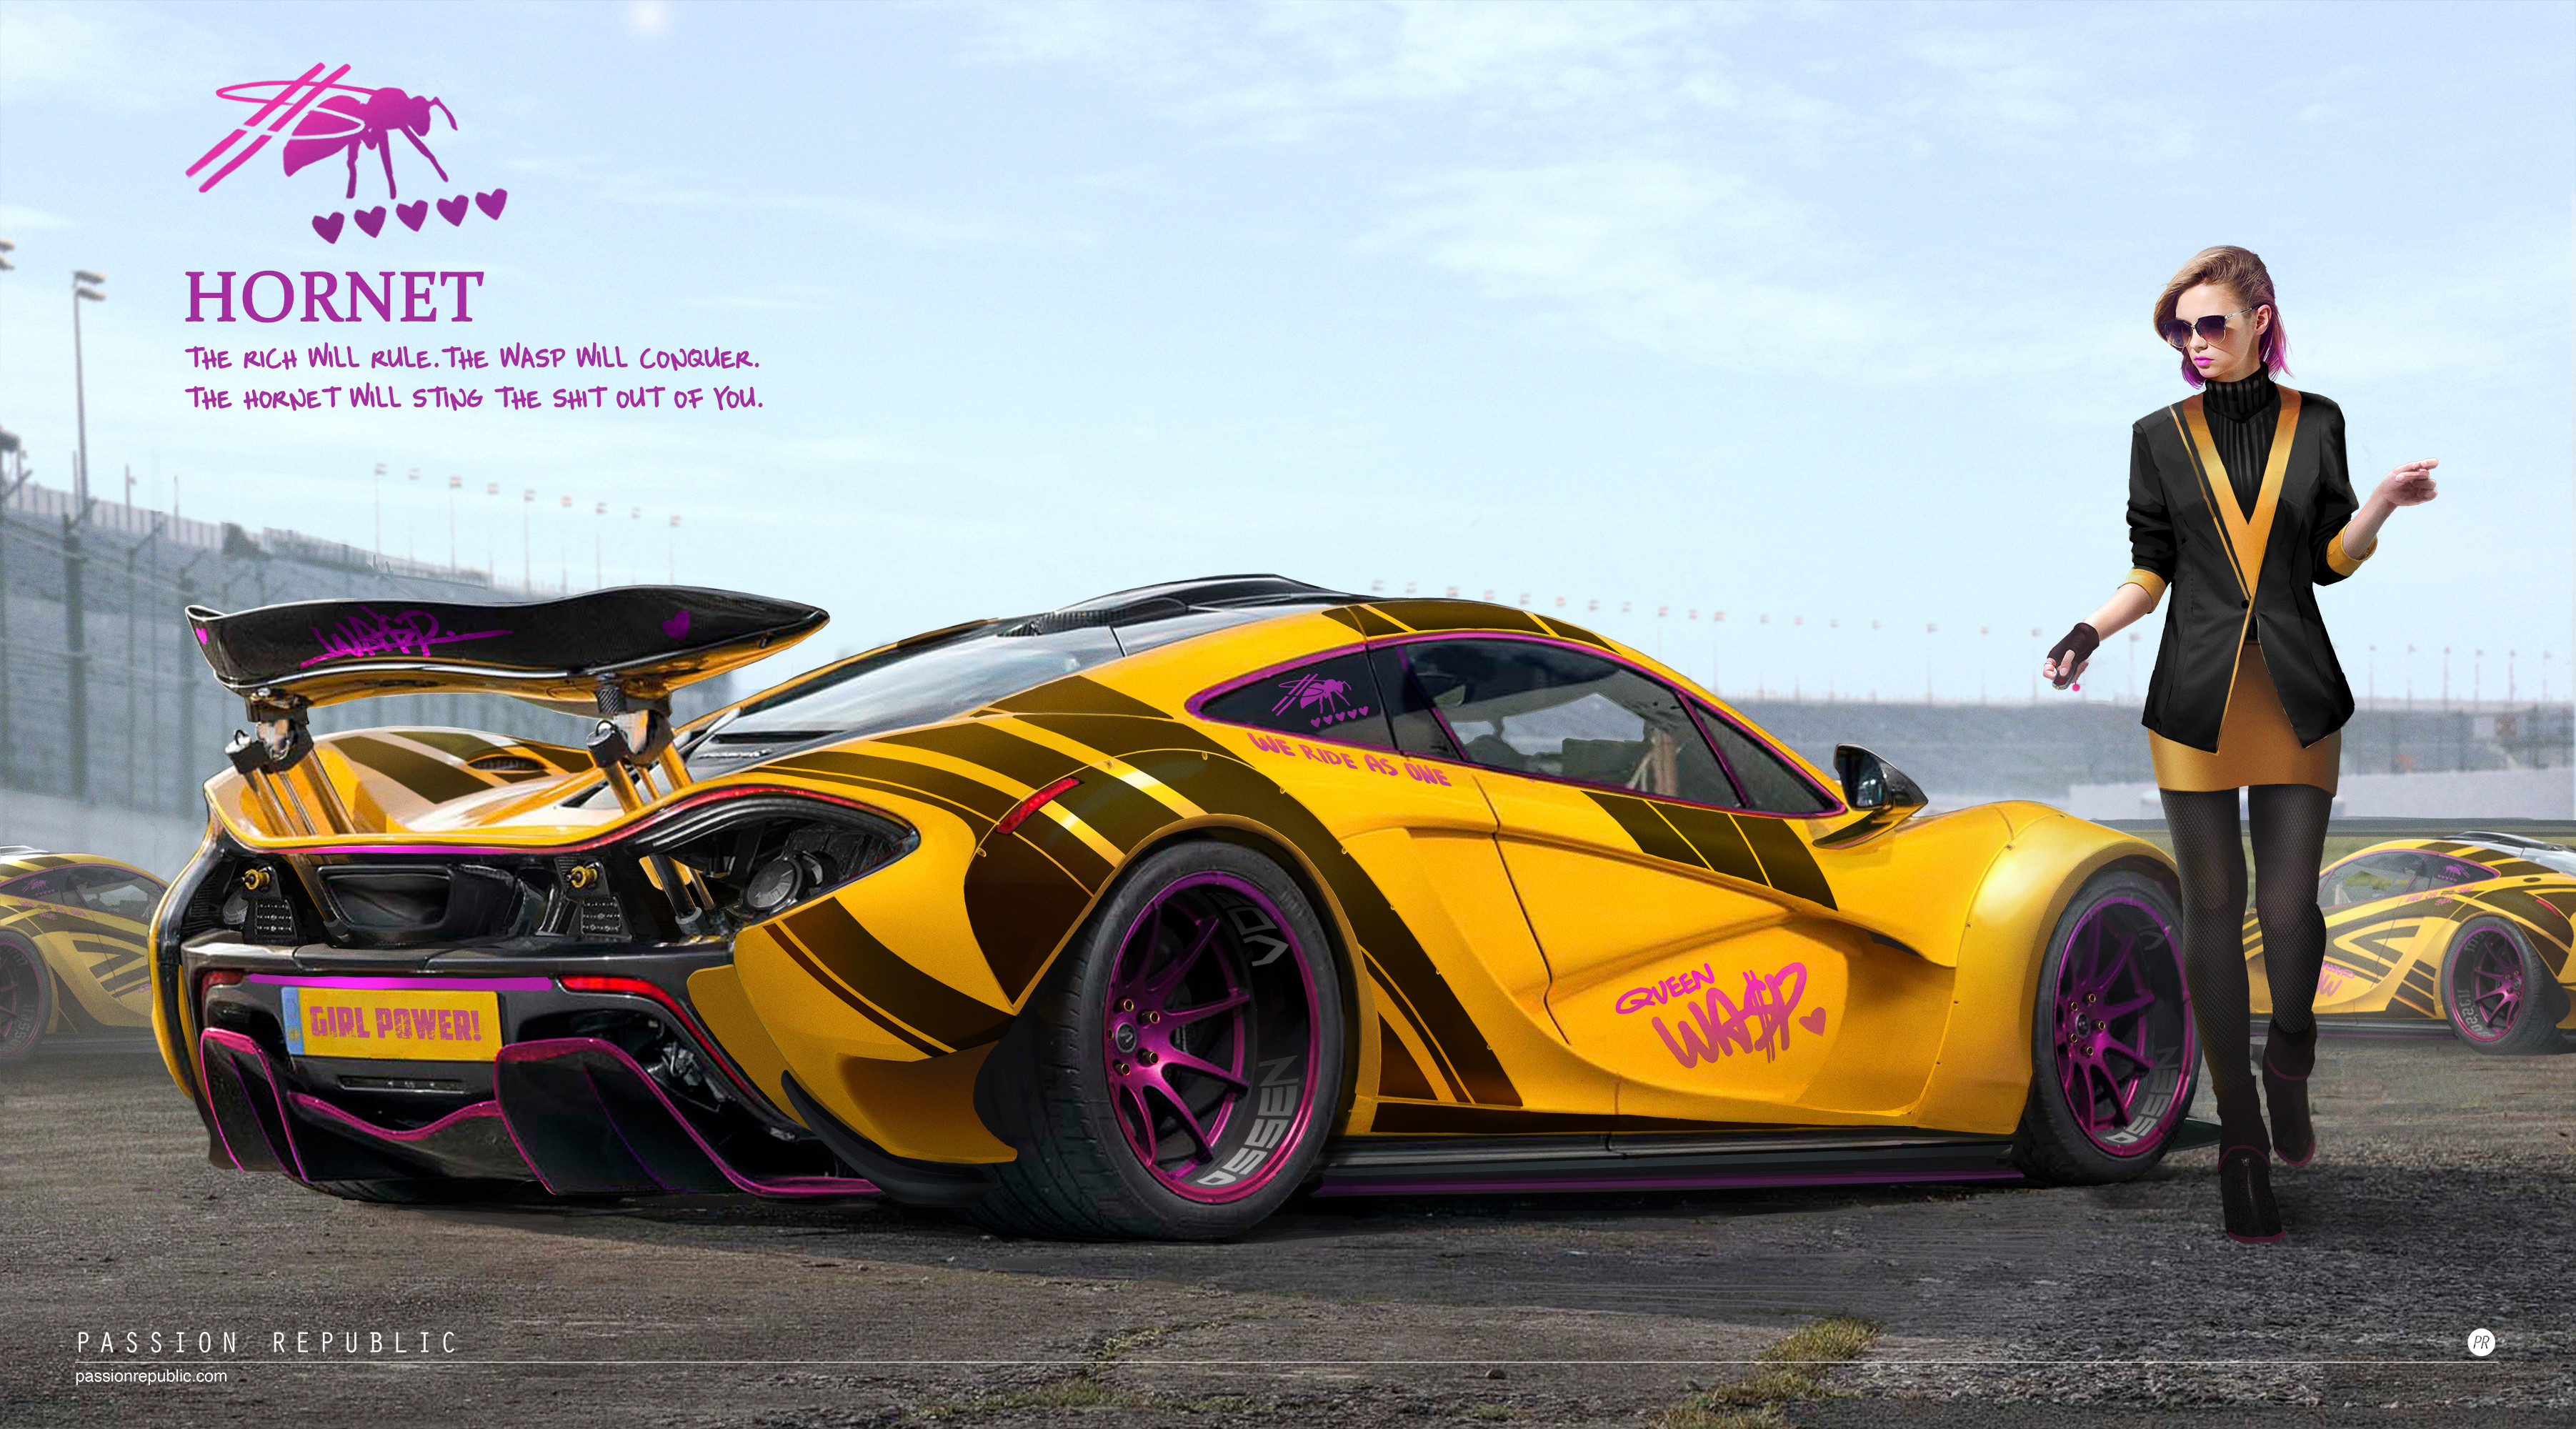 Mclaren P1 for Rich girls who are seeking for adventures. A group of rich girls call themselves Hornet. 